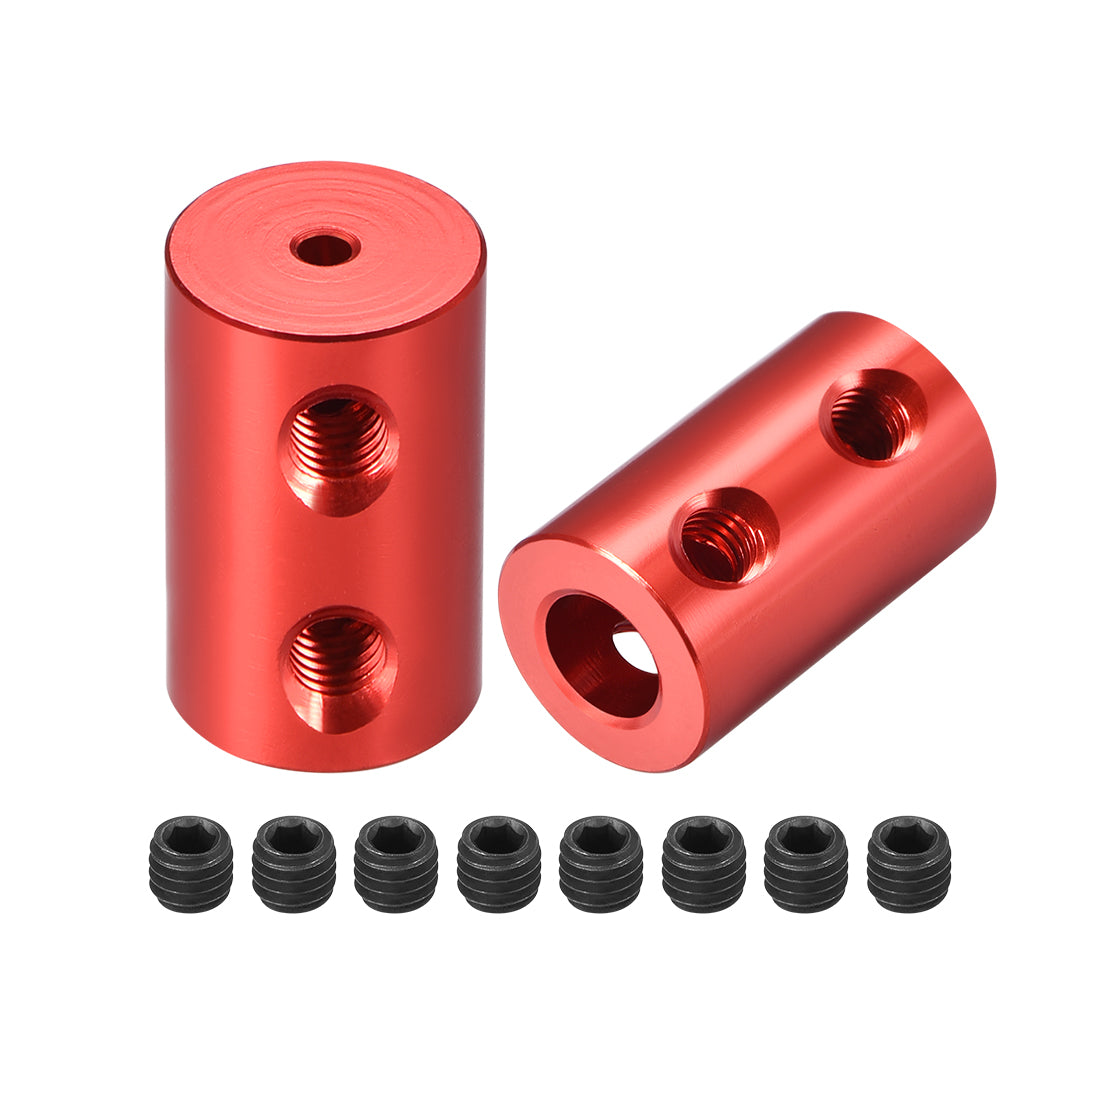 uxcell Uxcell Shaft Coupling 2mm to 6mm Bore L20xD12 Robot Motor Wheel Rigid Coupler Connector Red 2 Pcs